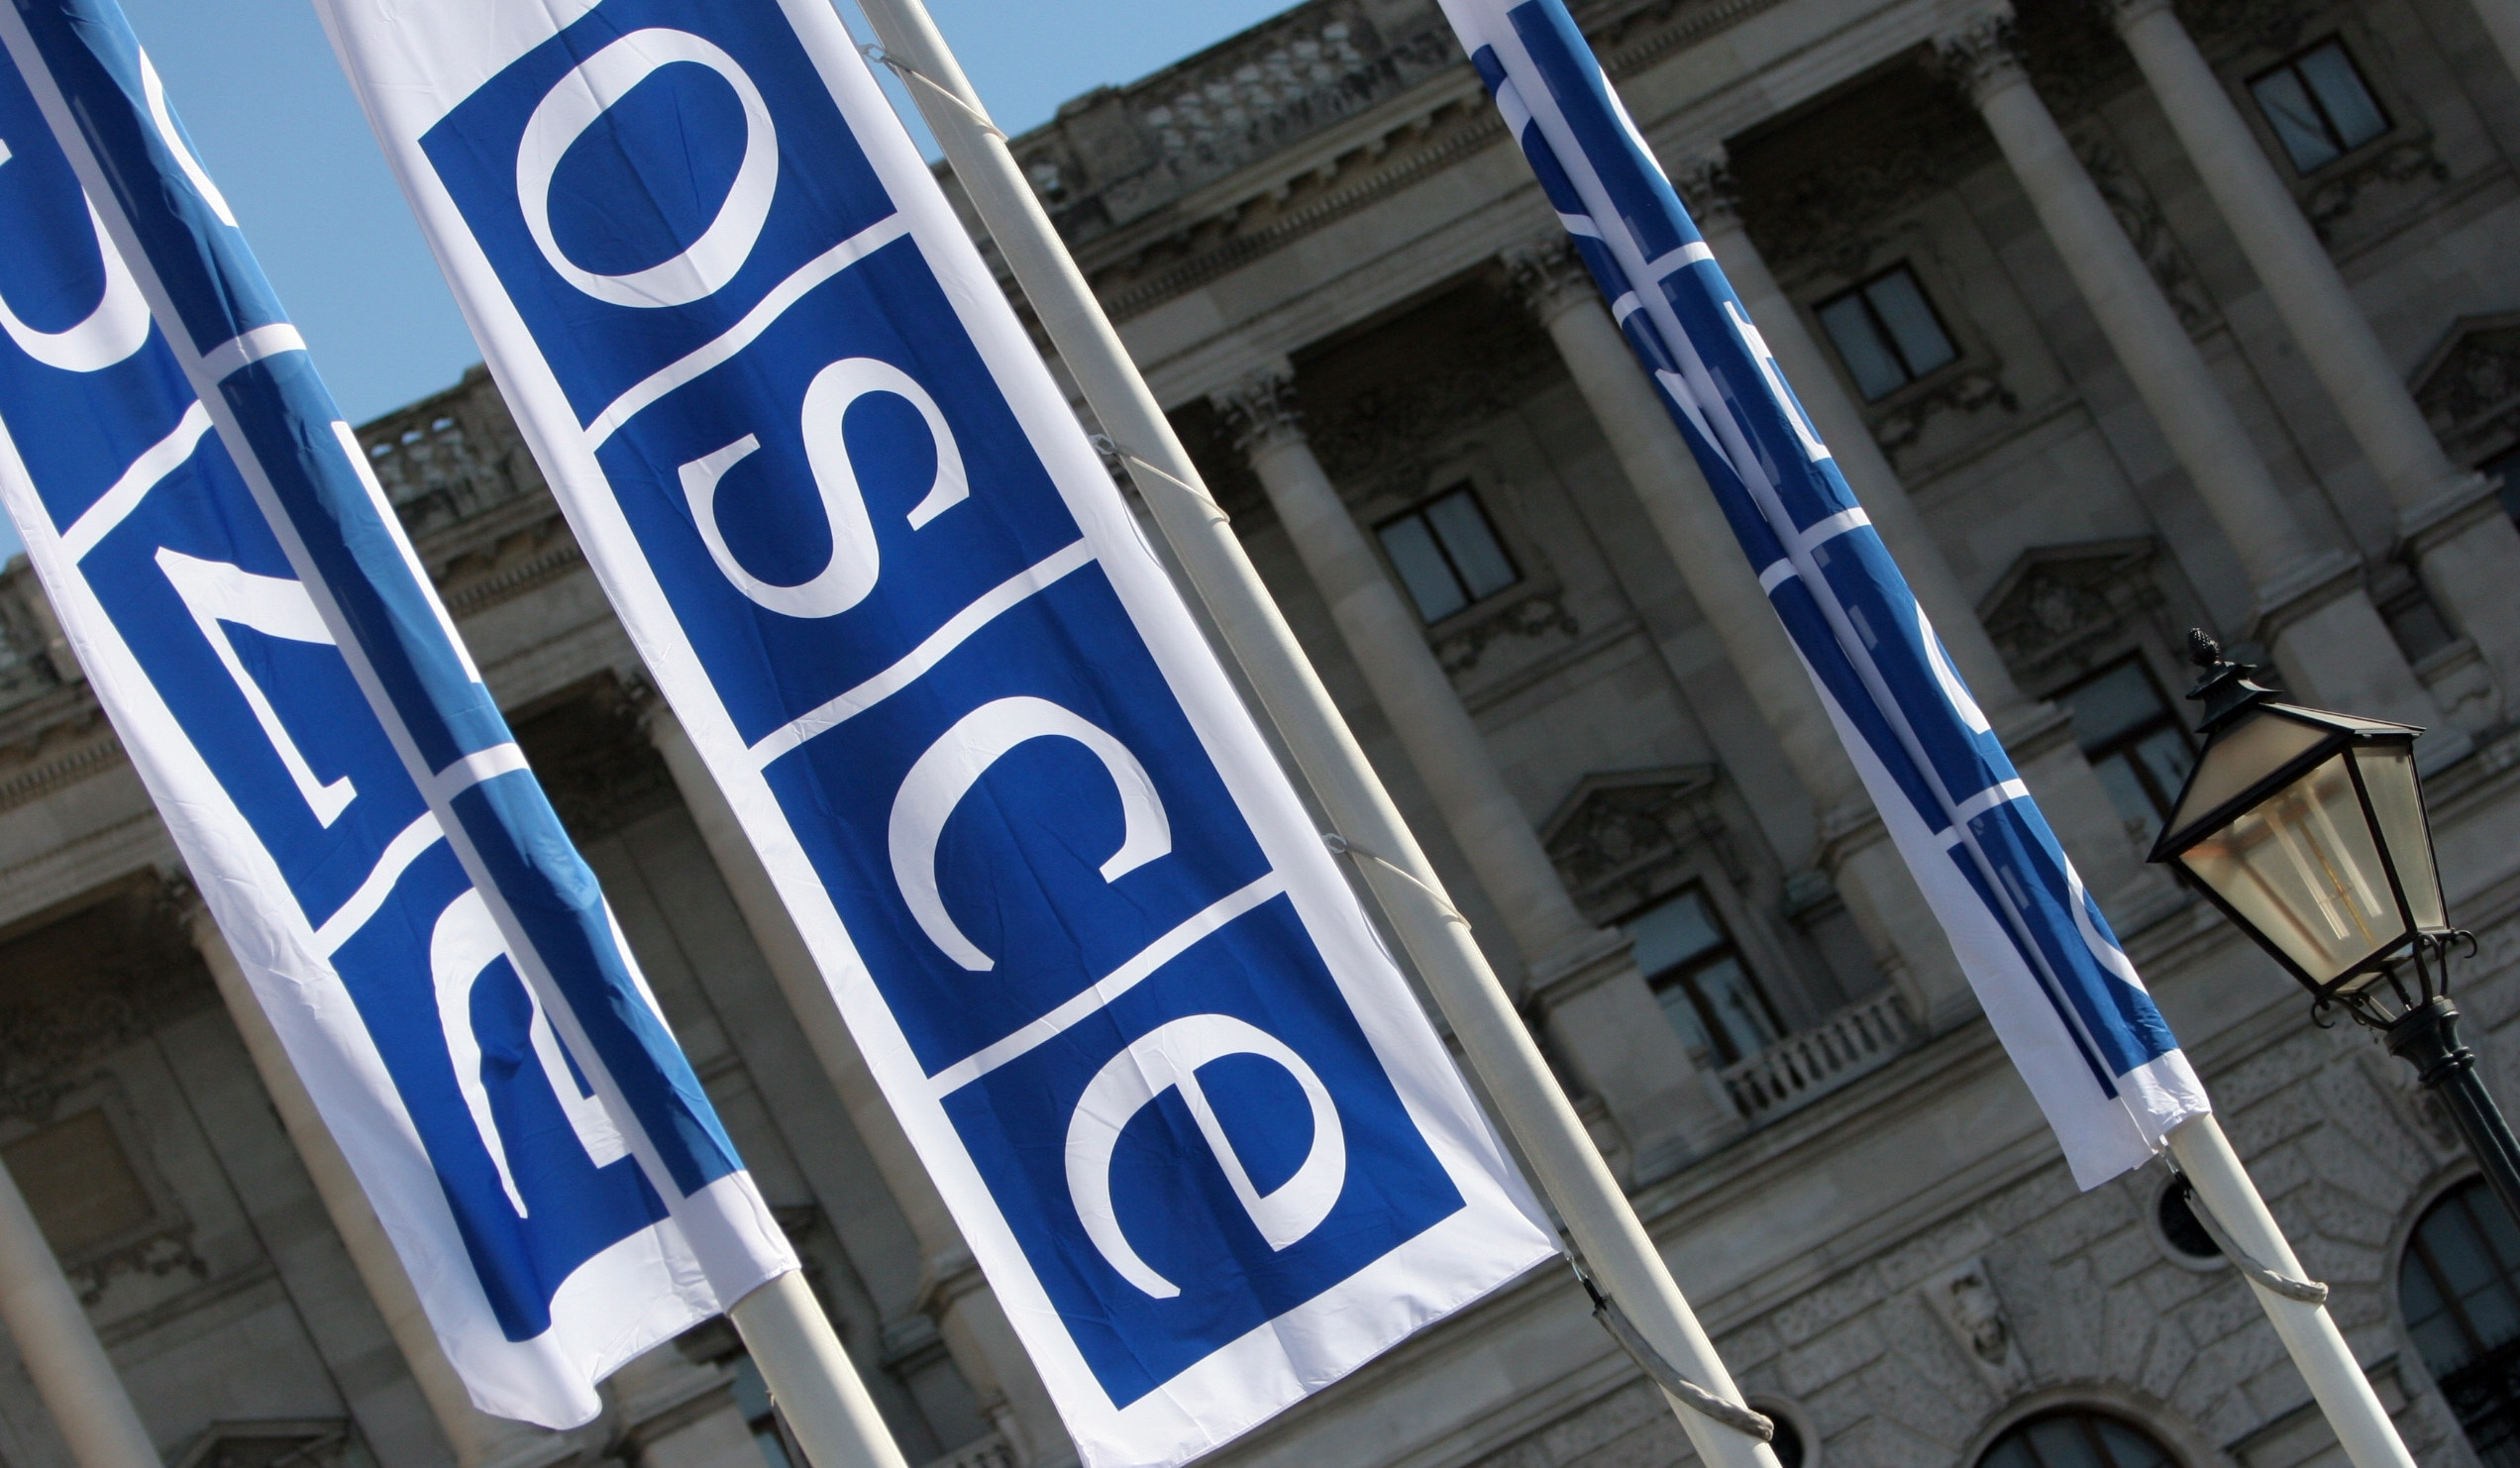 Romania will not issue visas to representatives of Russia and Belarus to participate in OSCE PA session